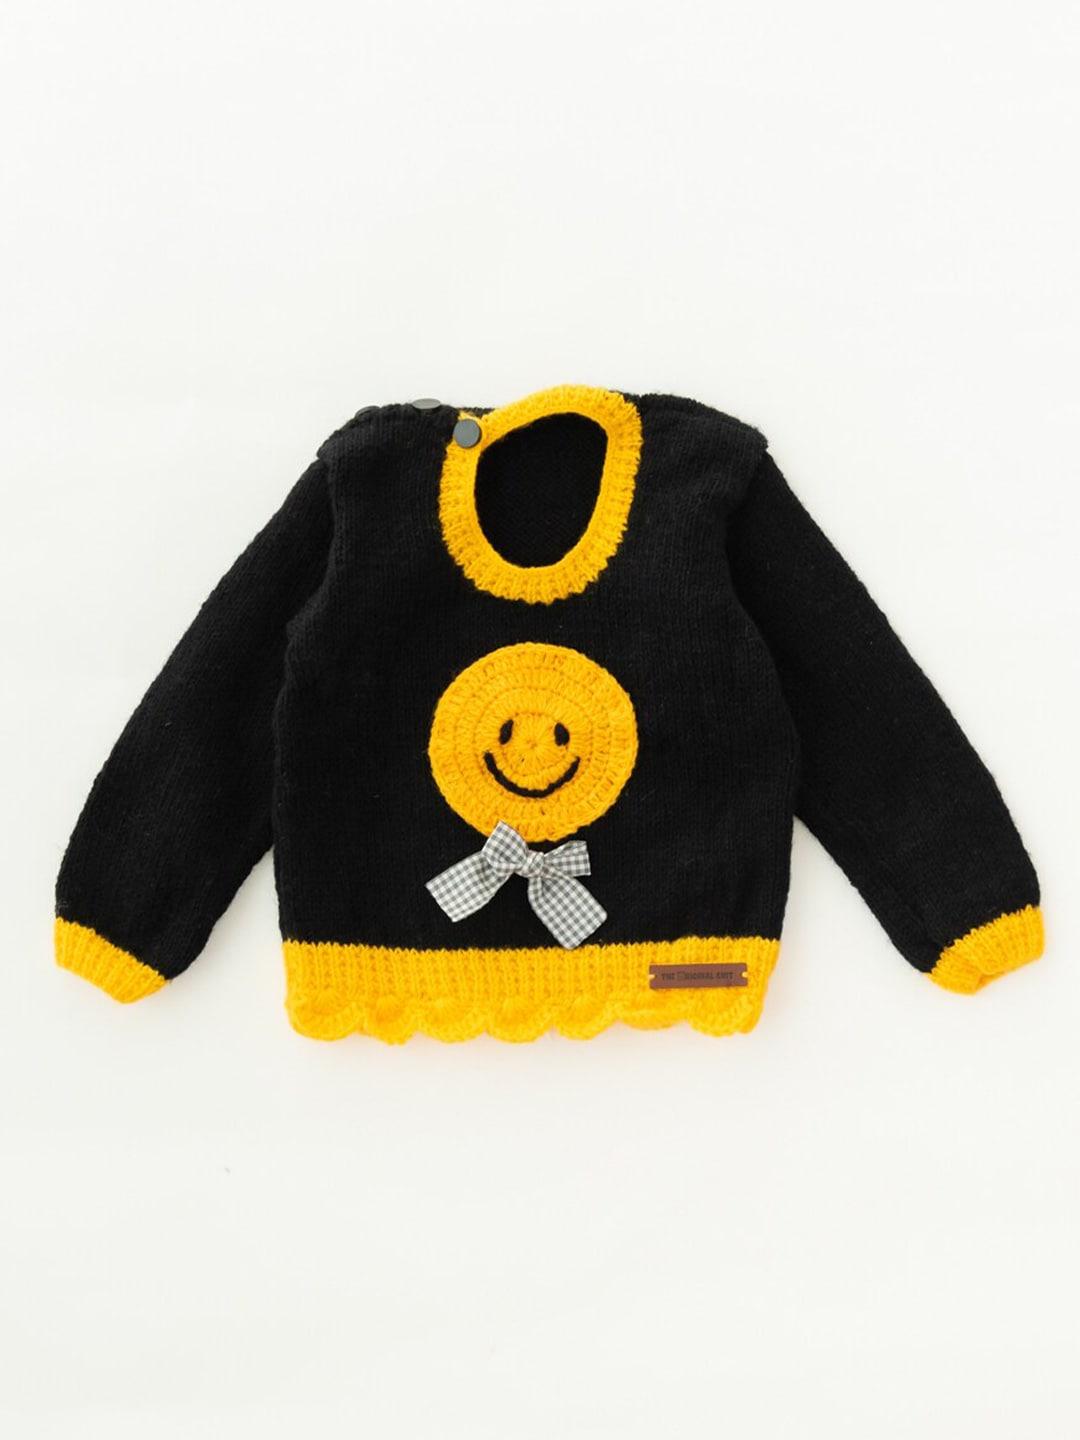 The Original Knit Infants Kids Black & Yellow Embroidered Pullover Sweater